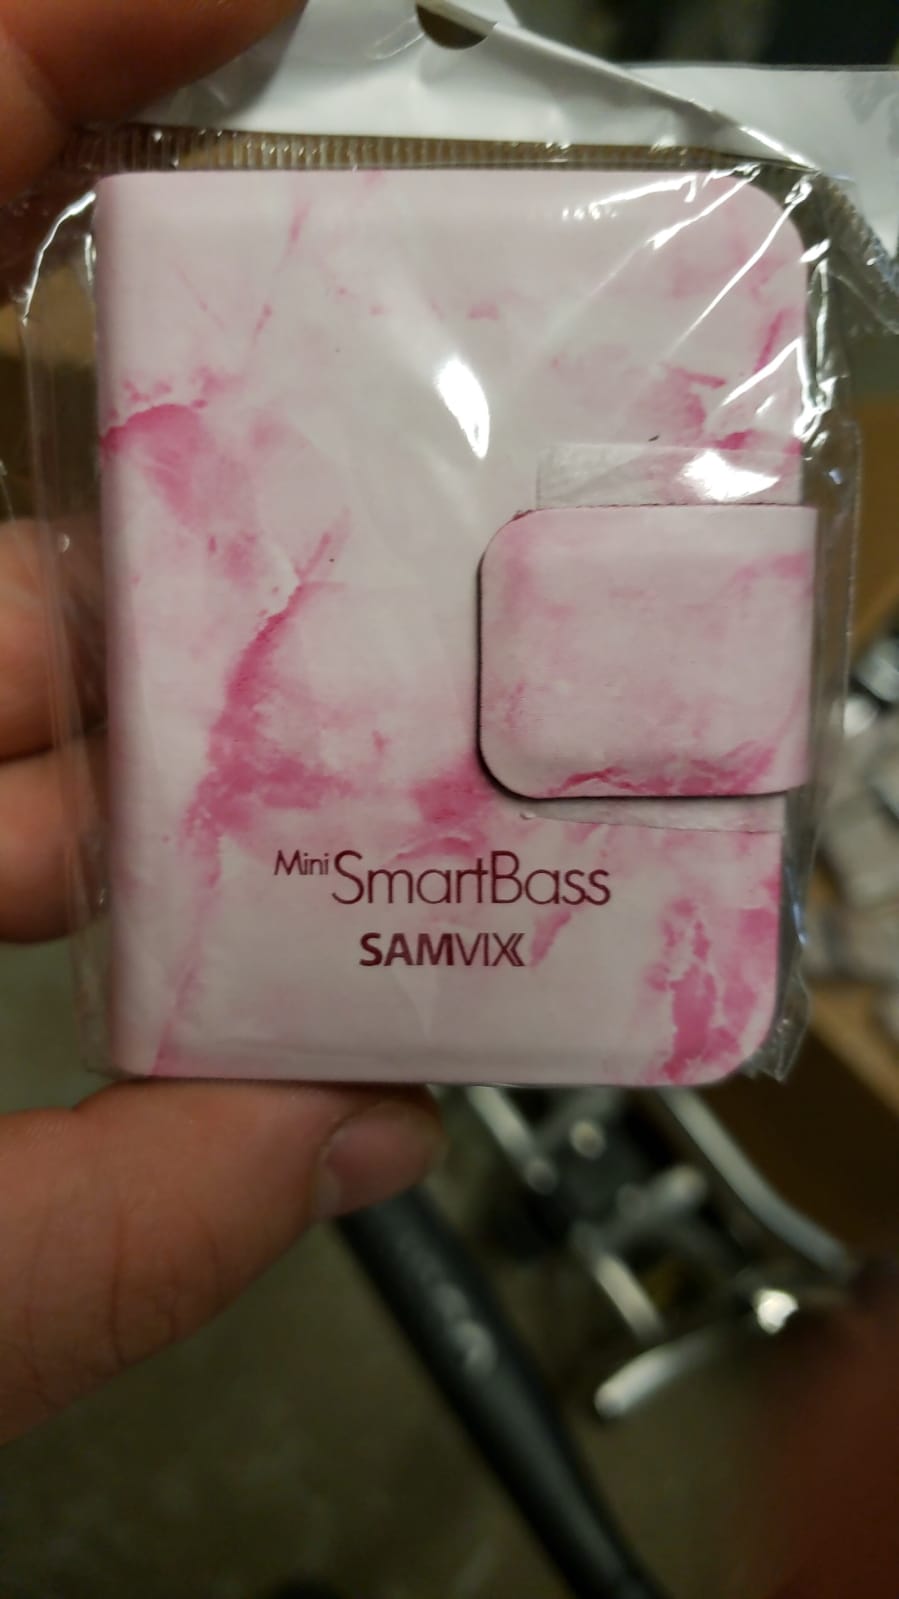 Smartbass 2.0 Leather Protective Case (Also fits Mini Smartbass), Pink Tie Dye